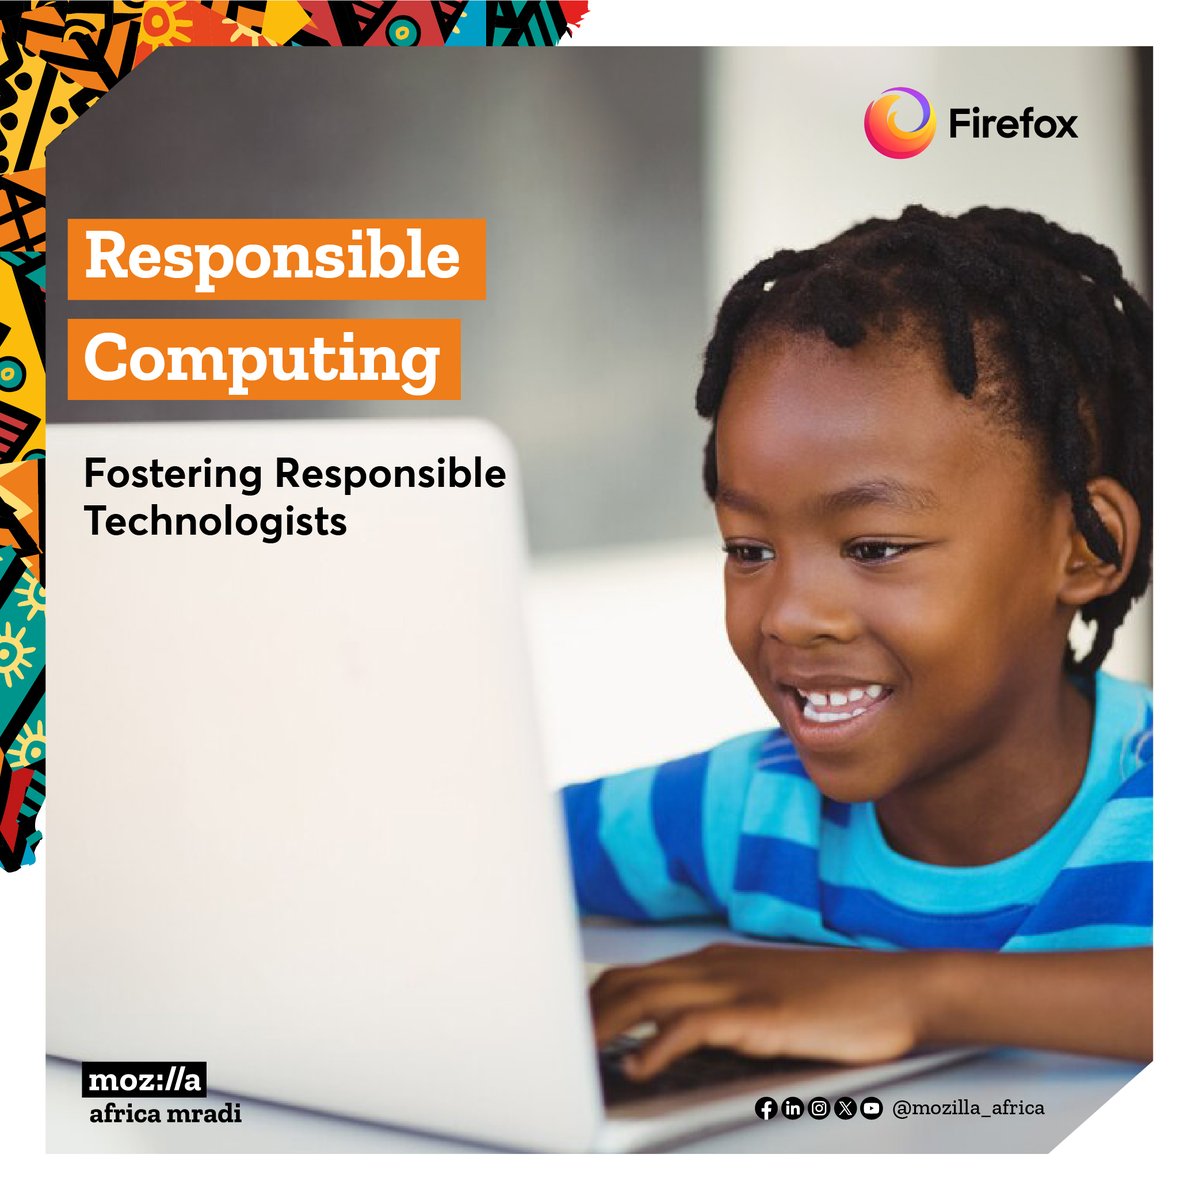 Mozilla Africa Mradi prioritizes ethics in tech education. We're shaping responsible technologists who understand the human impact of their work. With partners like Moringa School & ICT Mashinani, we're equipping youth to think ethically about AI. 
#MozillaAfricaMradi #Firefox